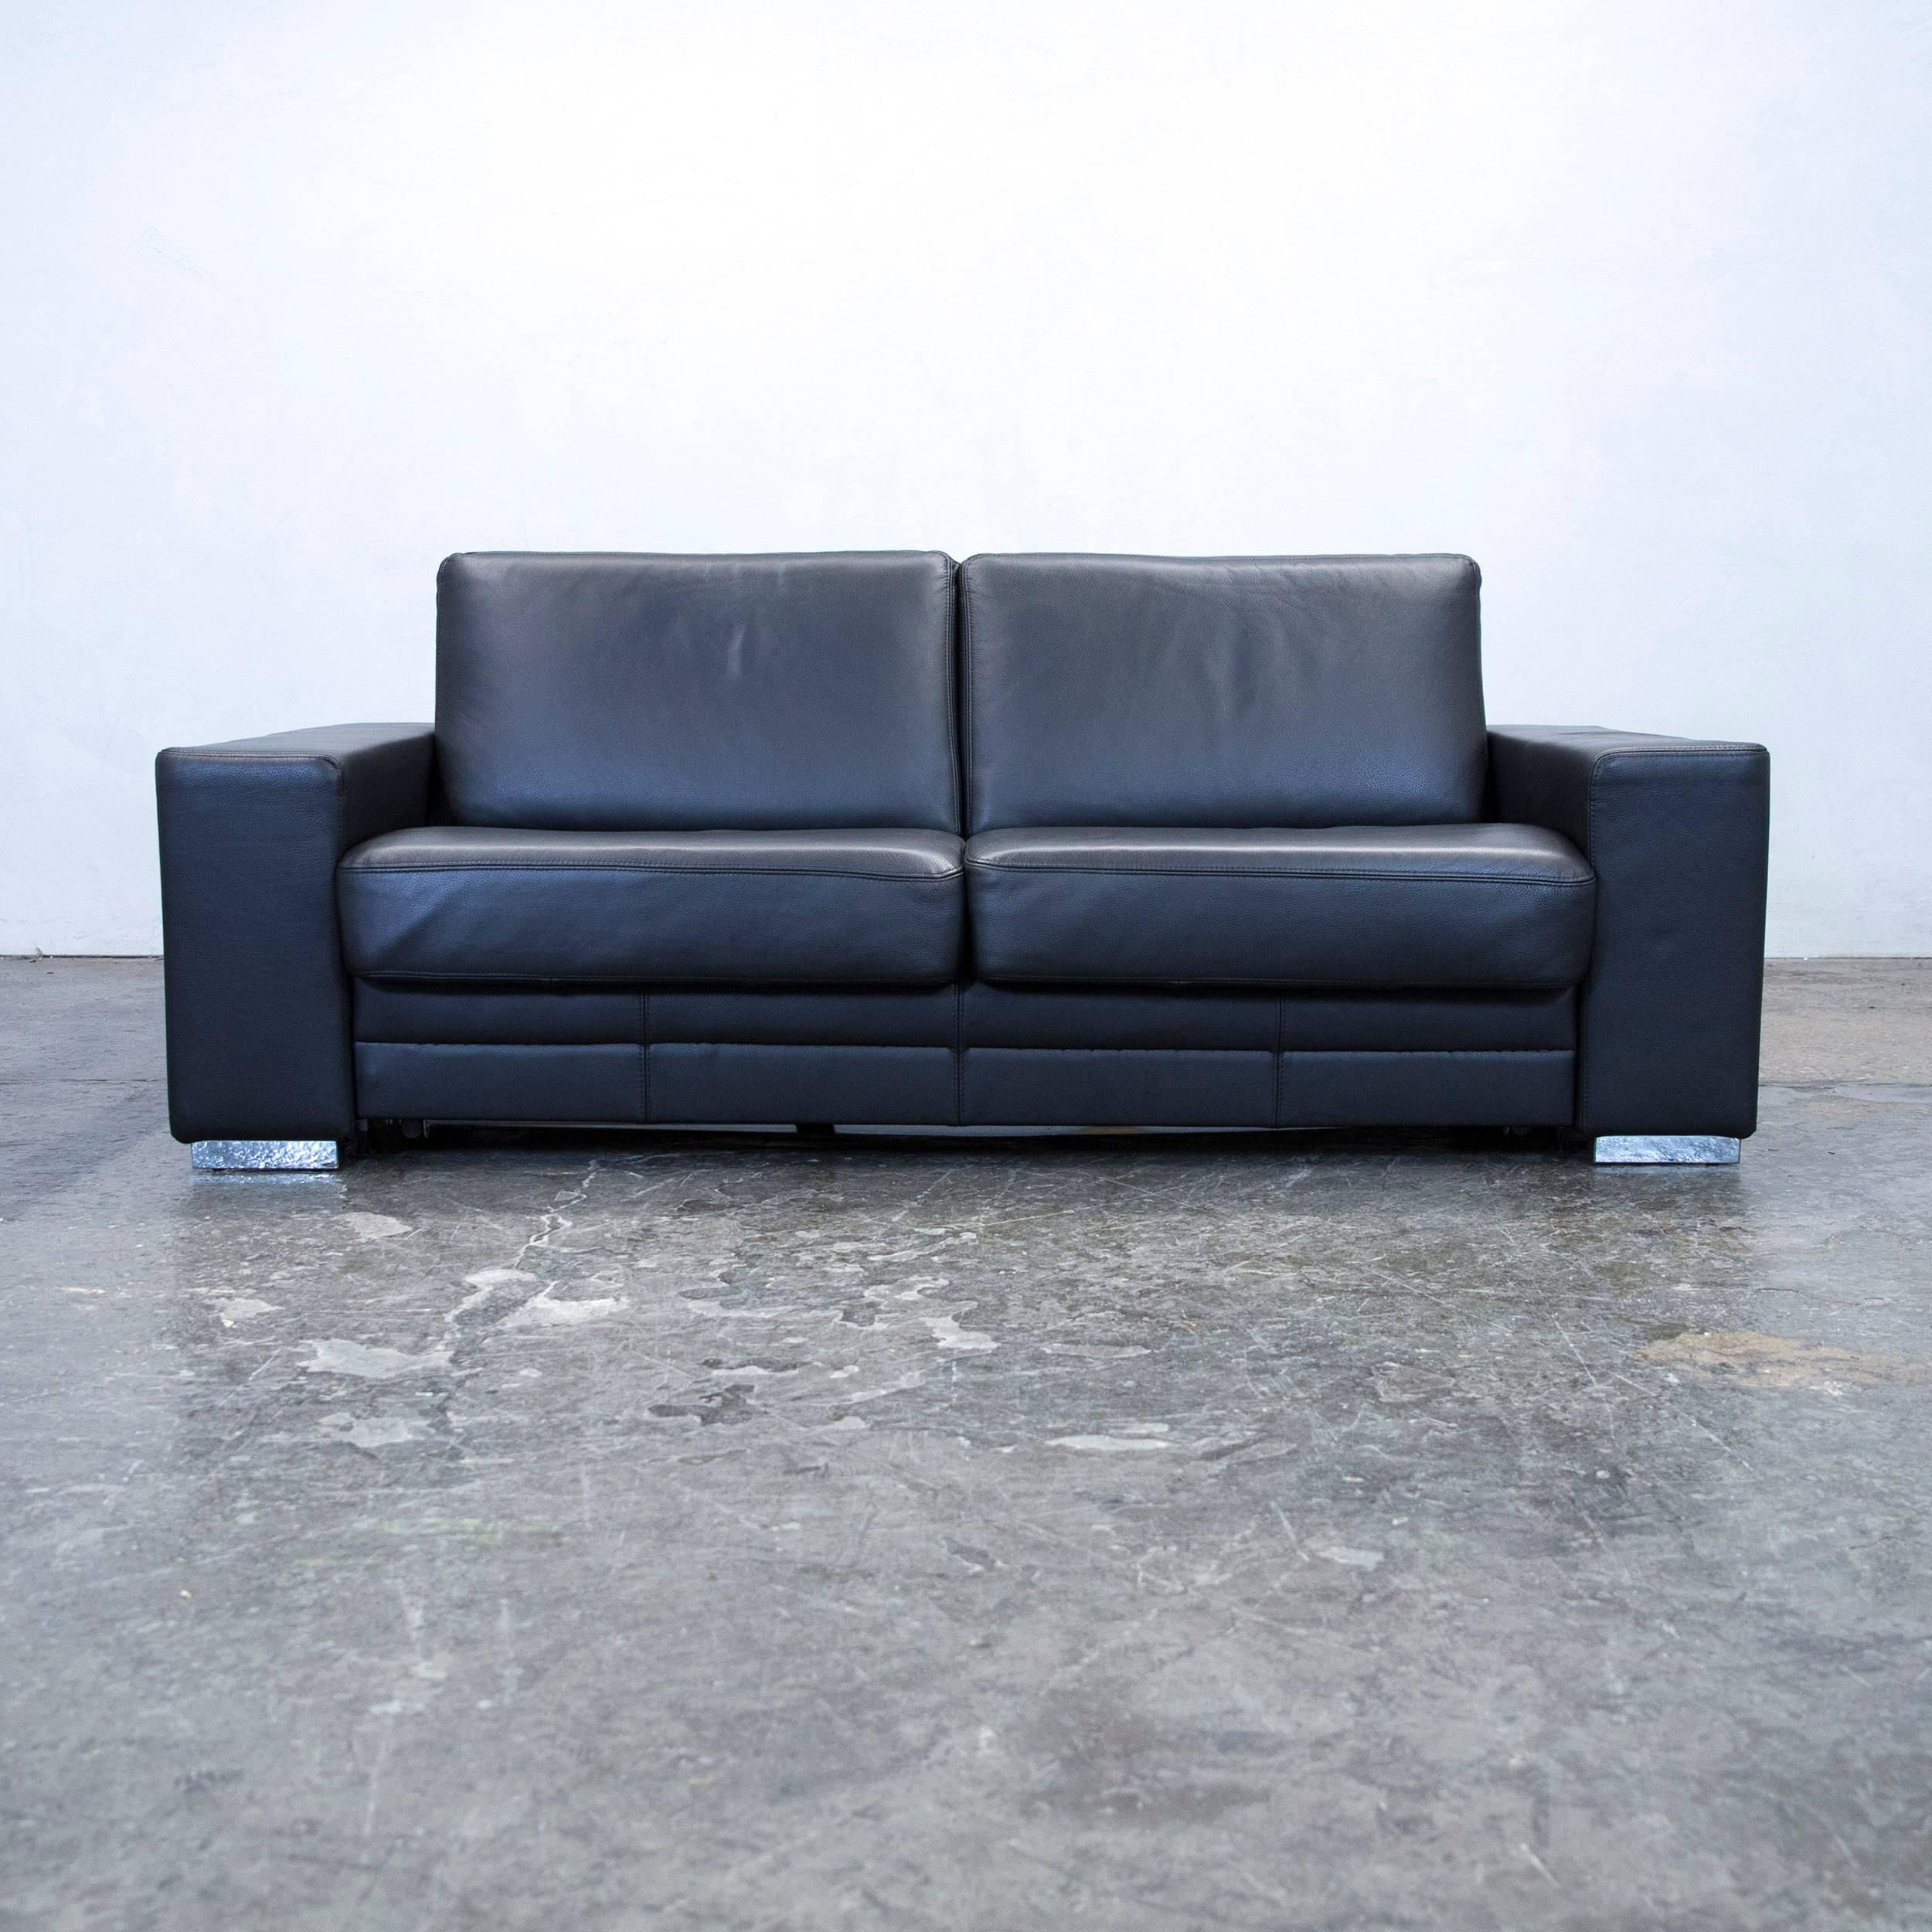 Black colored designer leather sleepsofa and footstool, in a minimalistic and modern design, with a convenient function, made for pure comfort and flexibility.